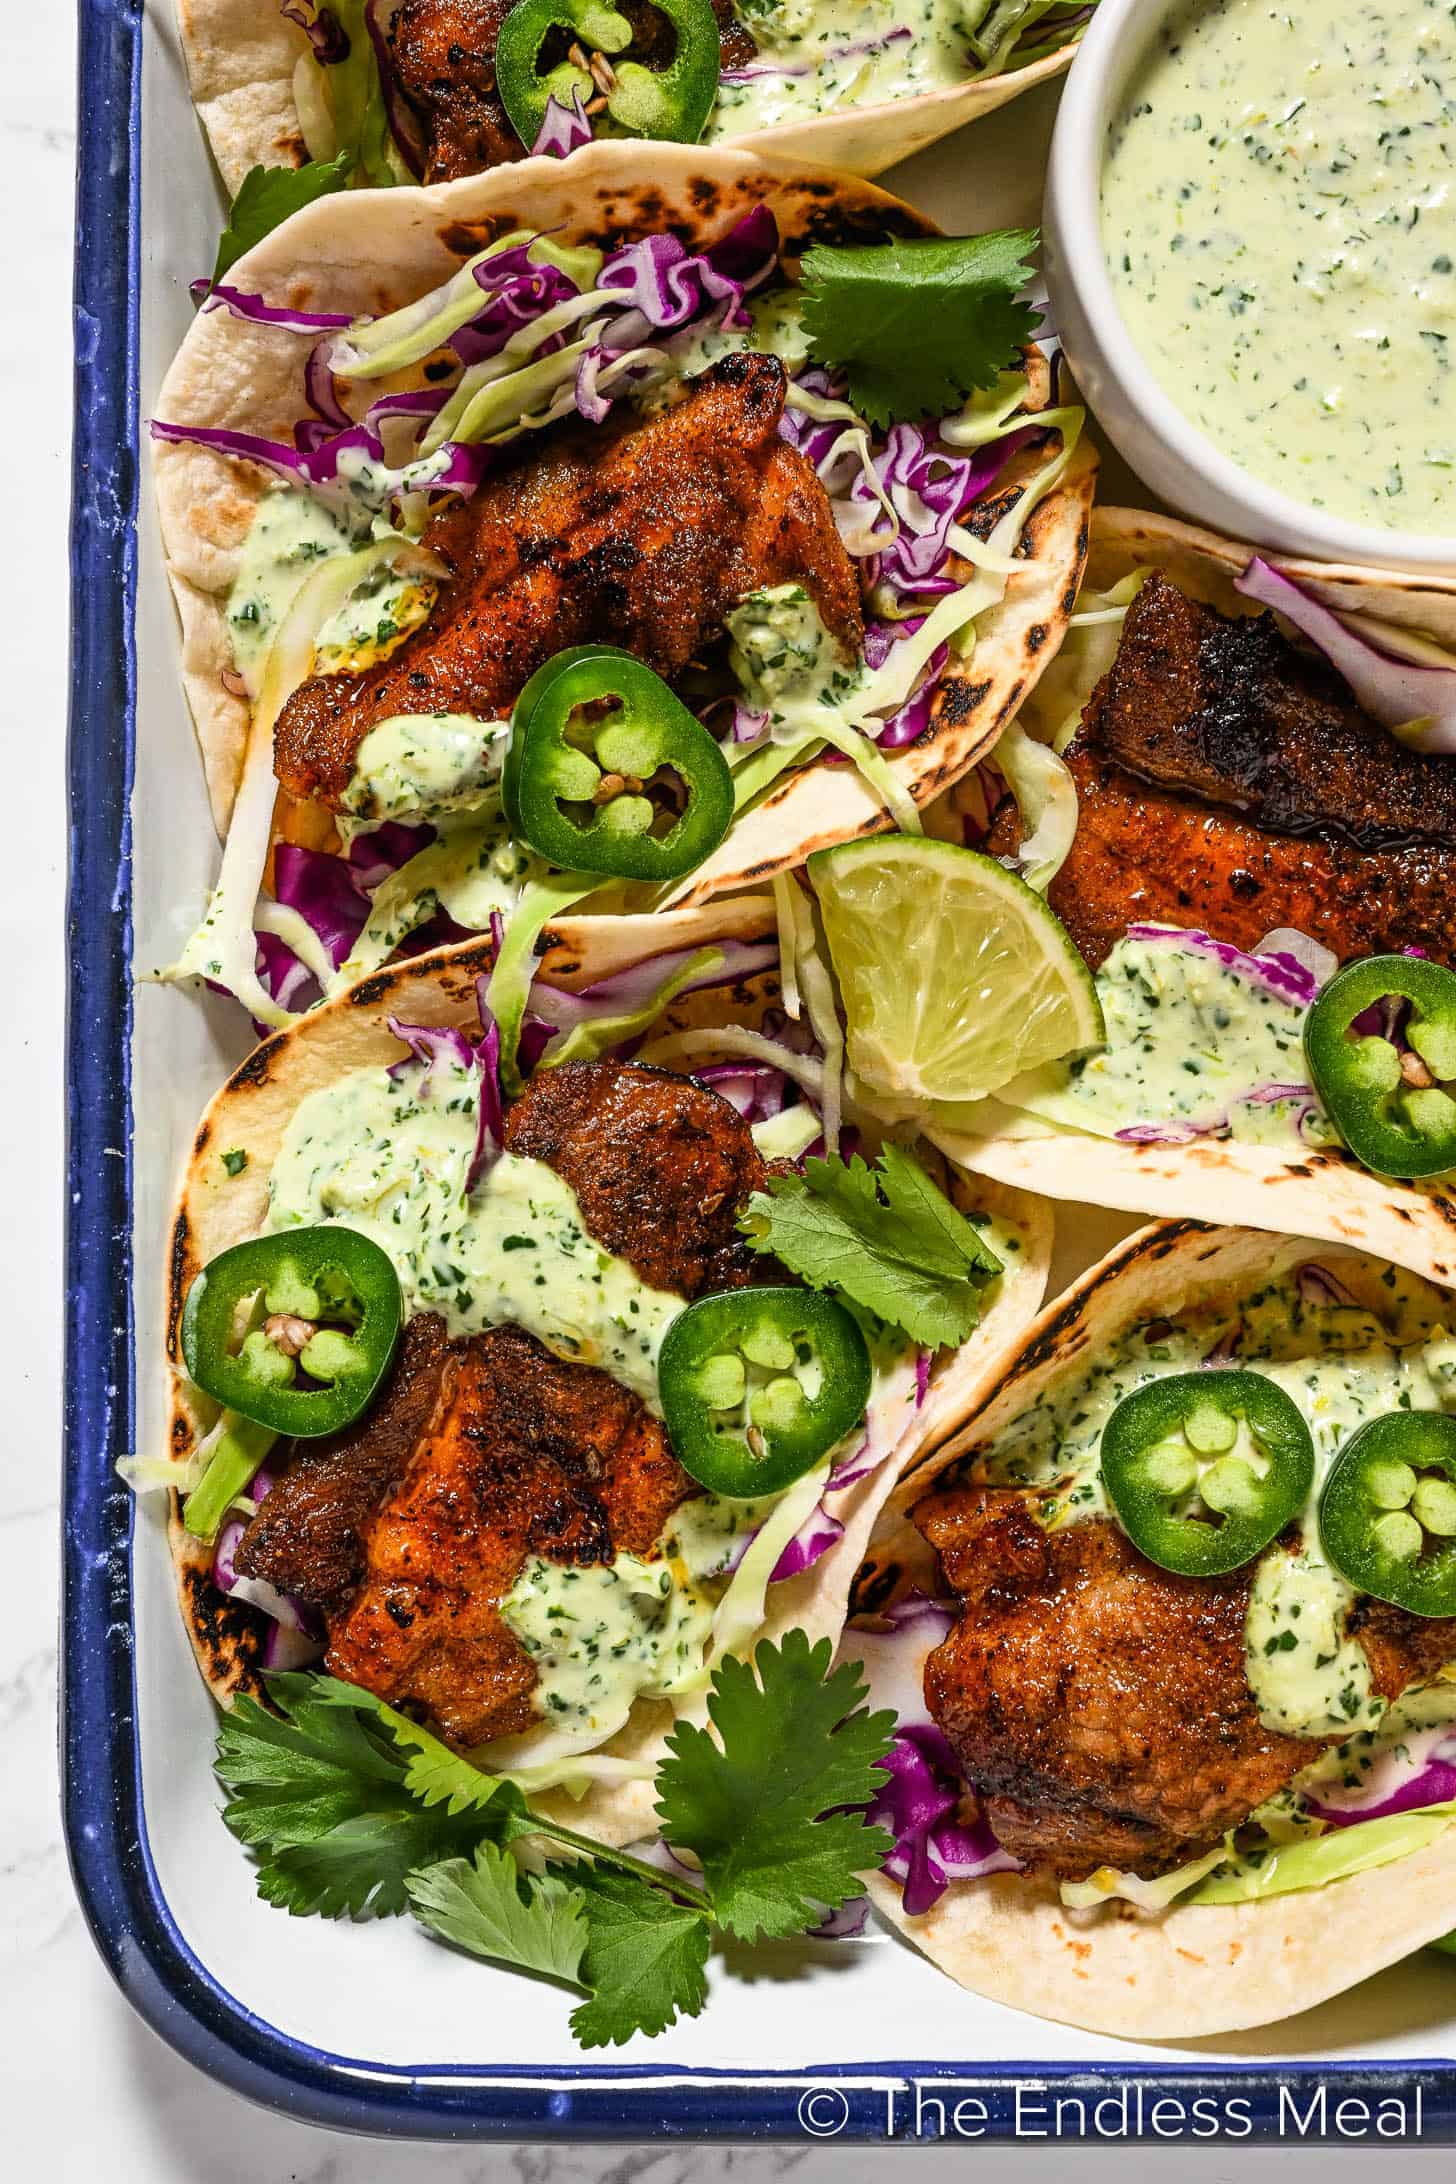 A tray of fish tacos with a tangy dipping sauce.